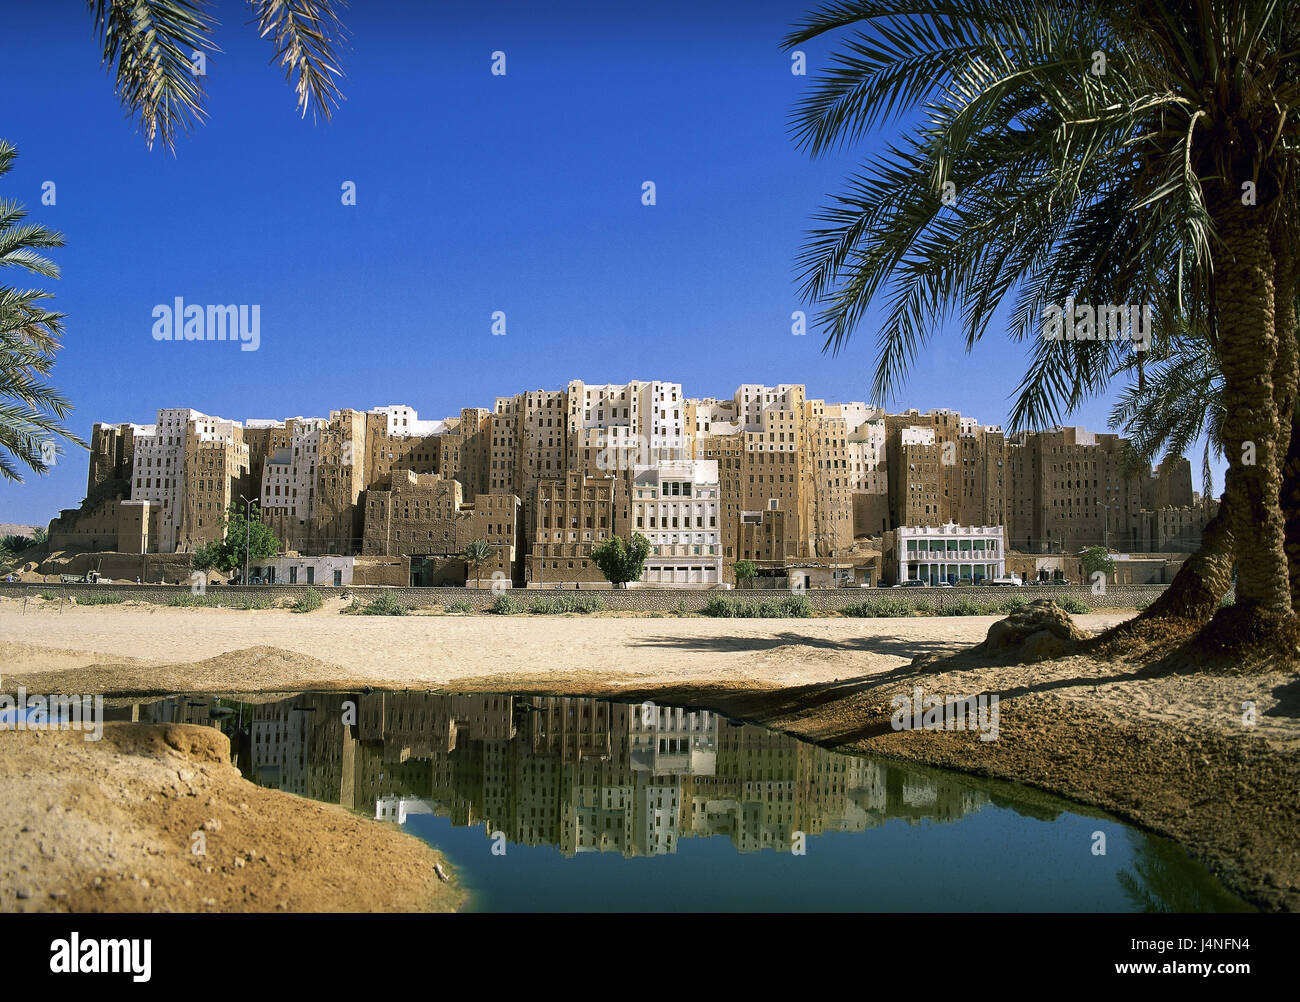 Yemen, wadi Hadramaut, Schibam, town view, the Near East, Shibam, Yemen, East, Hadhramaut, Hadramut, town, architecture, historically, building, mucky building, mucky houses, UNESCO-world cultural heritage, outskirts, water, pool, palms, Stock Photo